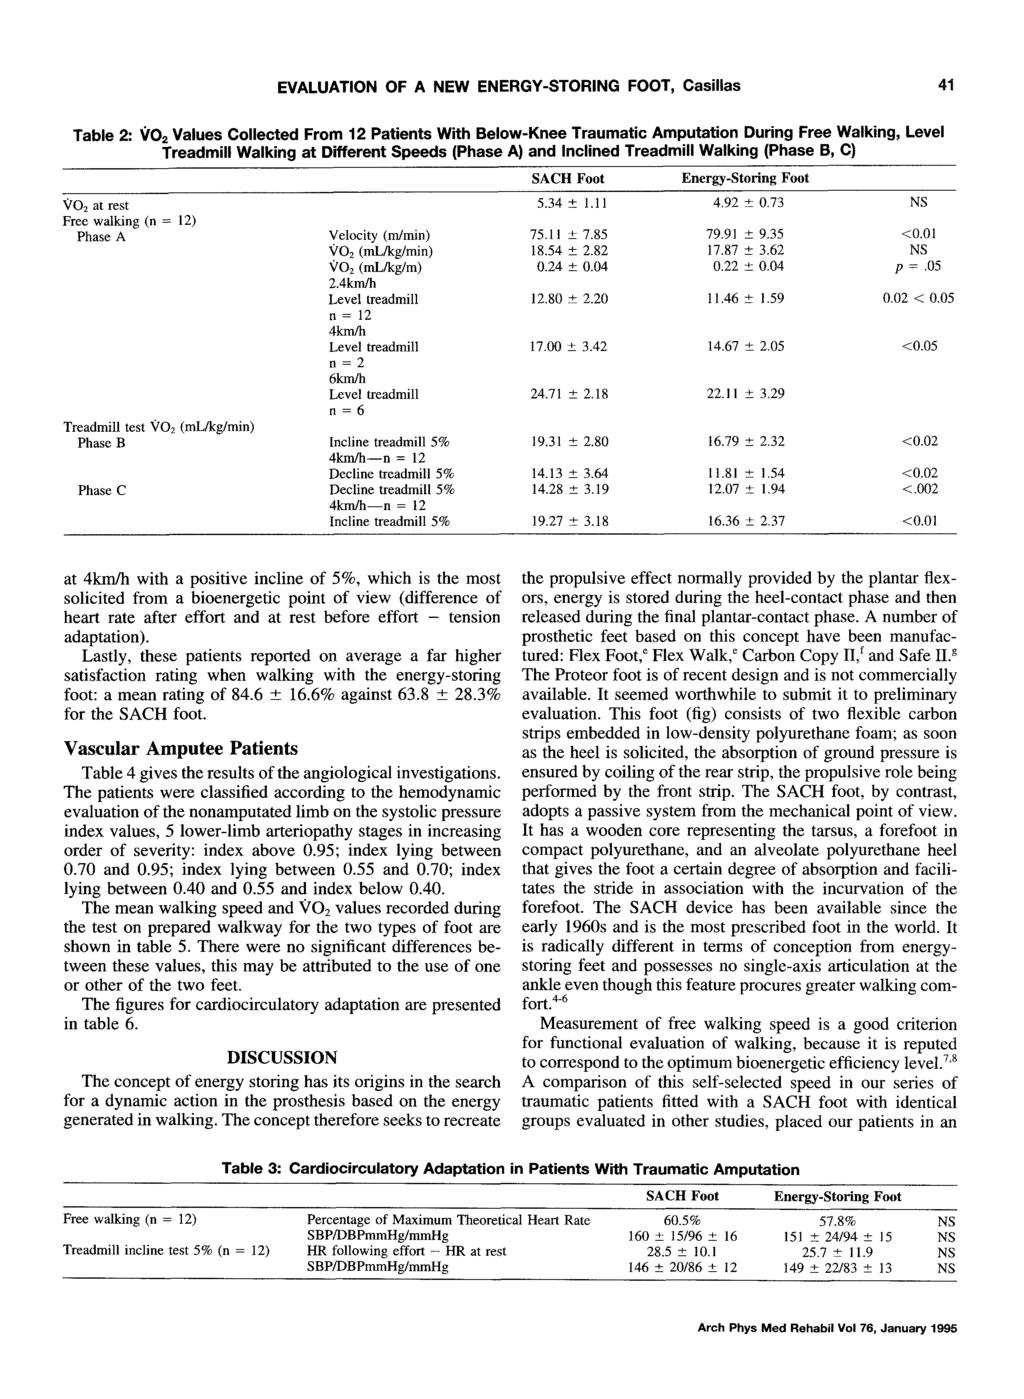 EVALUATION OF A NEW ENERGY-STORING FOOT, Casillas 41 Table 2:VO2 Values Collected From 12 Patients With Below-Knee Traumatic Amputation During Free Walking, Level Treadmill Walking at Different